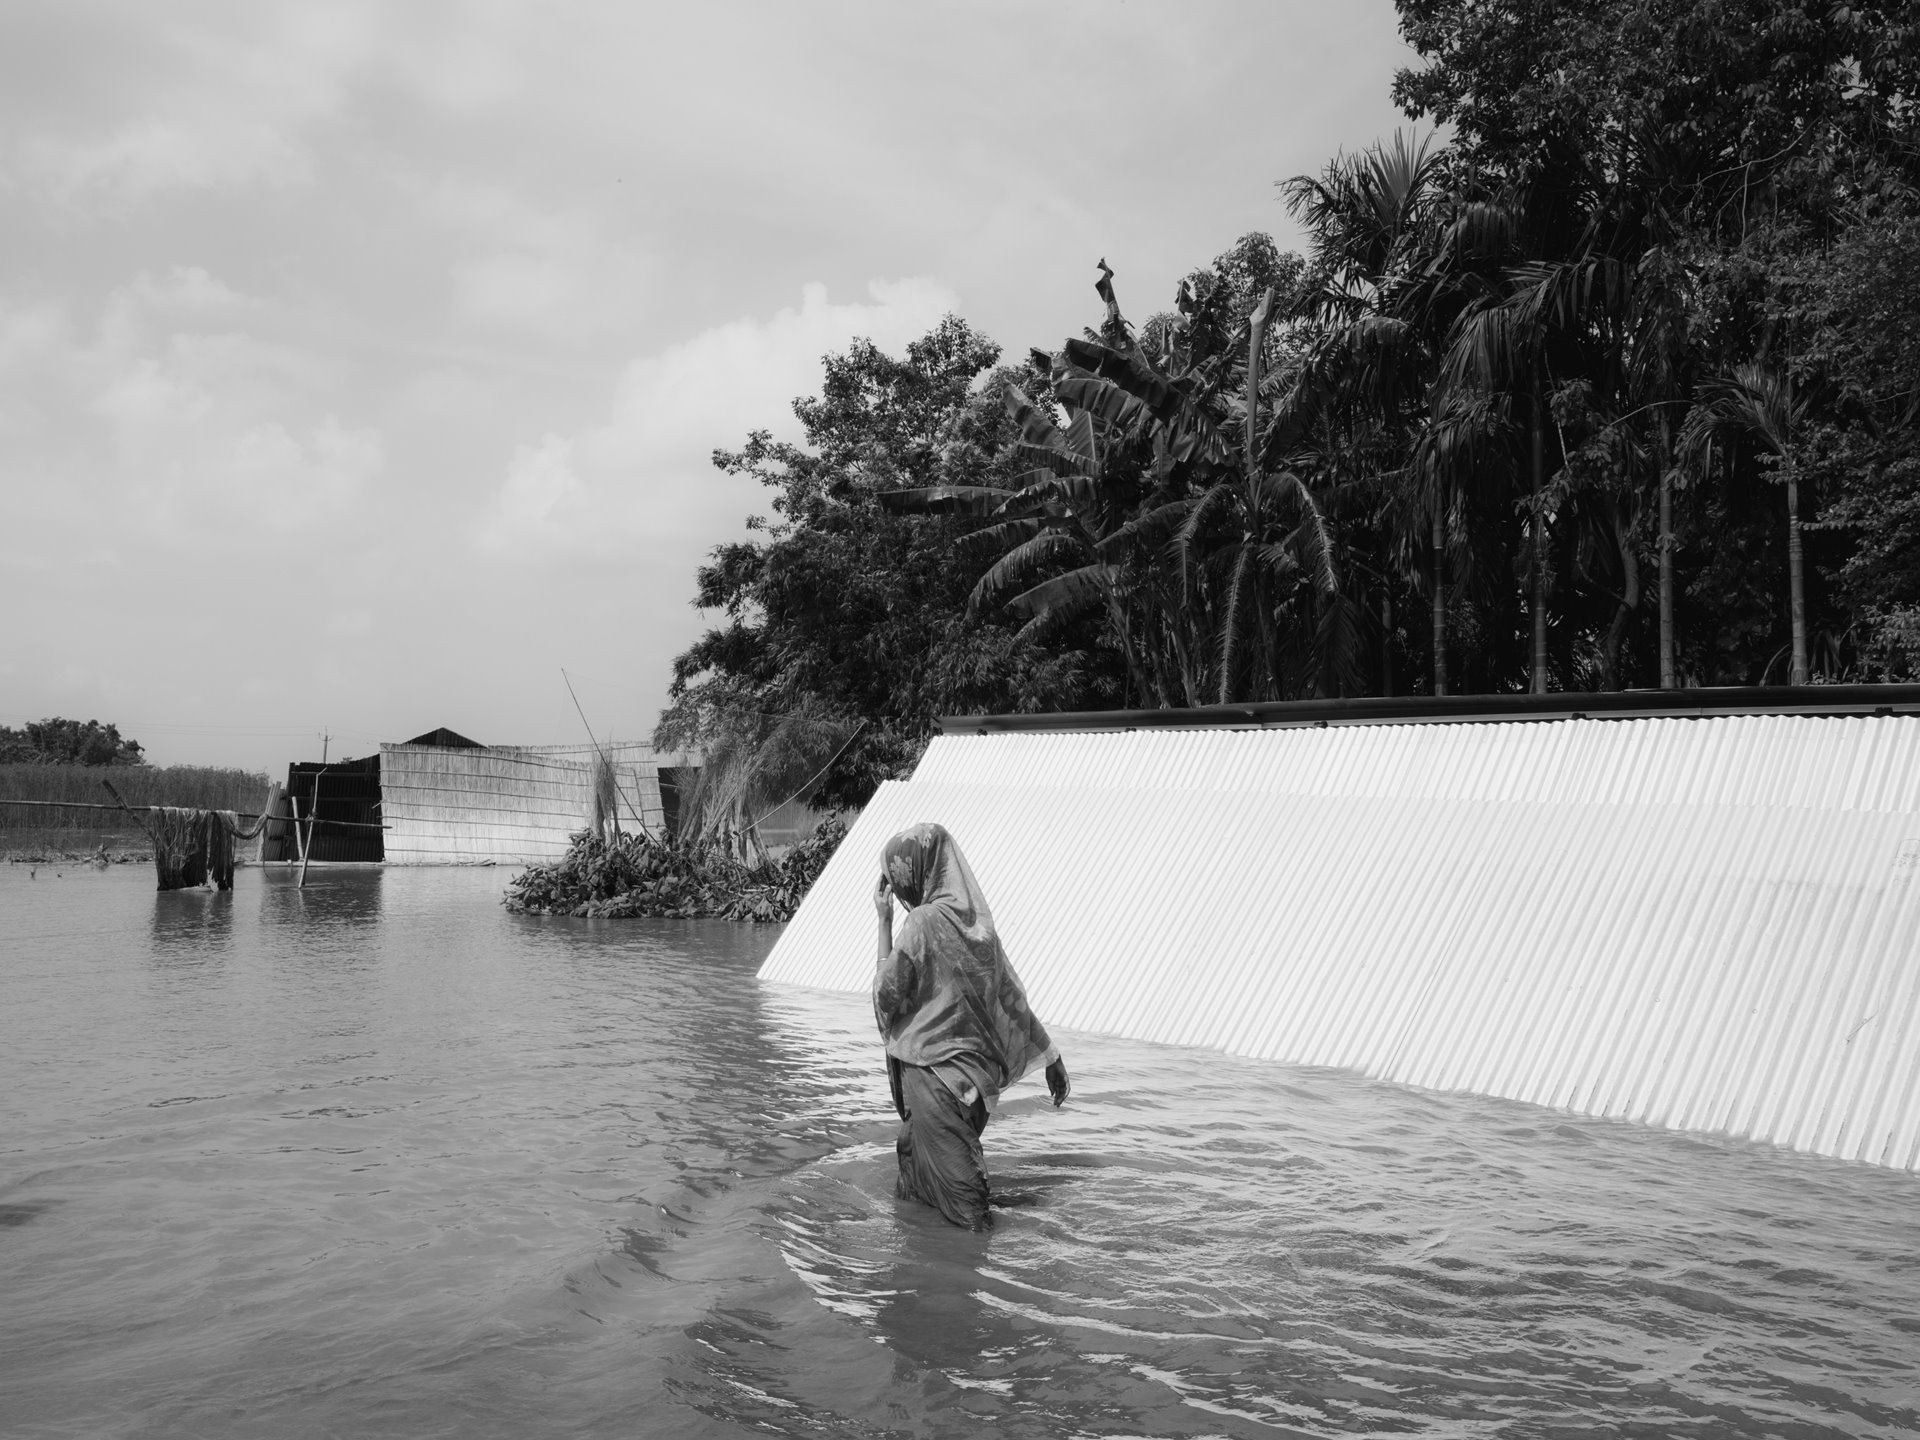 In Kharbali, a Bengali Muslim woman navigates floodwaters during Assam&#39;s five-month monsoon season. In July 2023, devastating floods affected lower Assam, a region that is predominantly Bengali Muslim. Approximately 35,000 sought refuge in flood relief camps. The floods obliterate homes, farms, and crops, intensifying struggles for National Register of Citizens (NRC) inclusion amidst political and environmental precarity. Jania, Barpeta, Lower Assam, India.